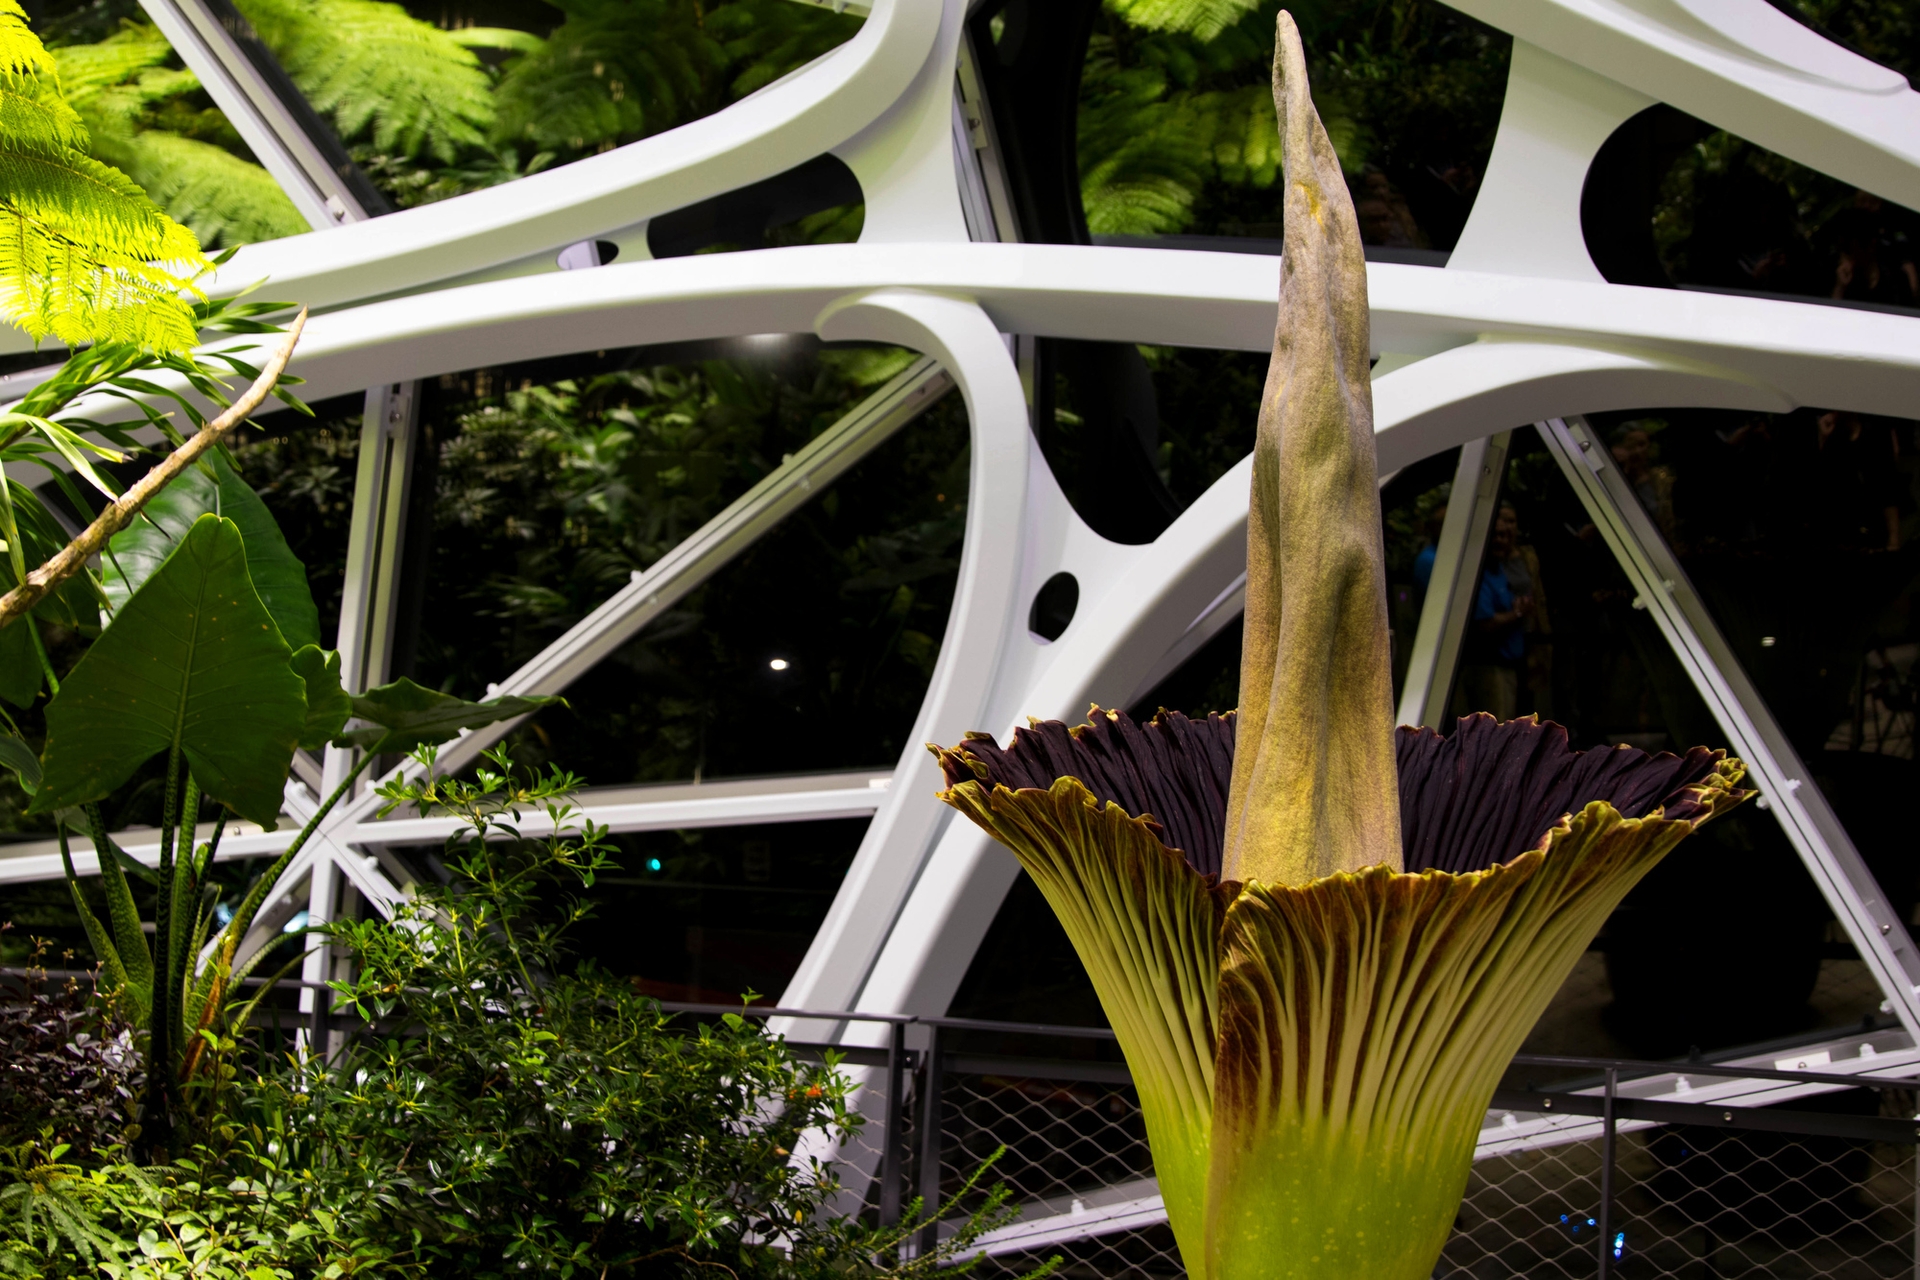 The corpse flower in bloom in The Spheres, shot at night. 